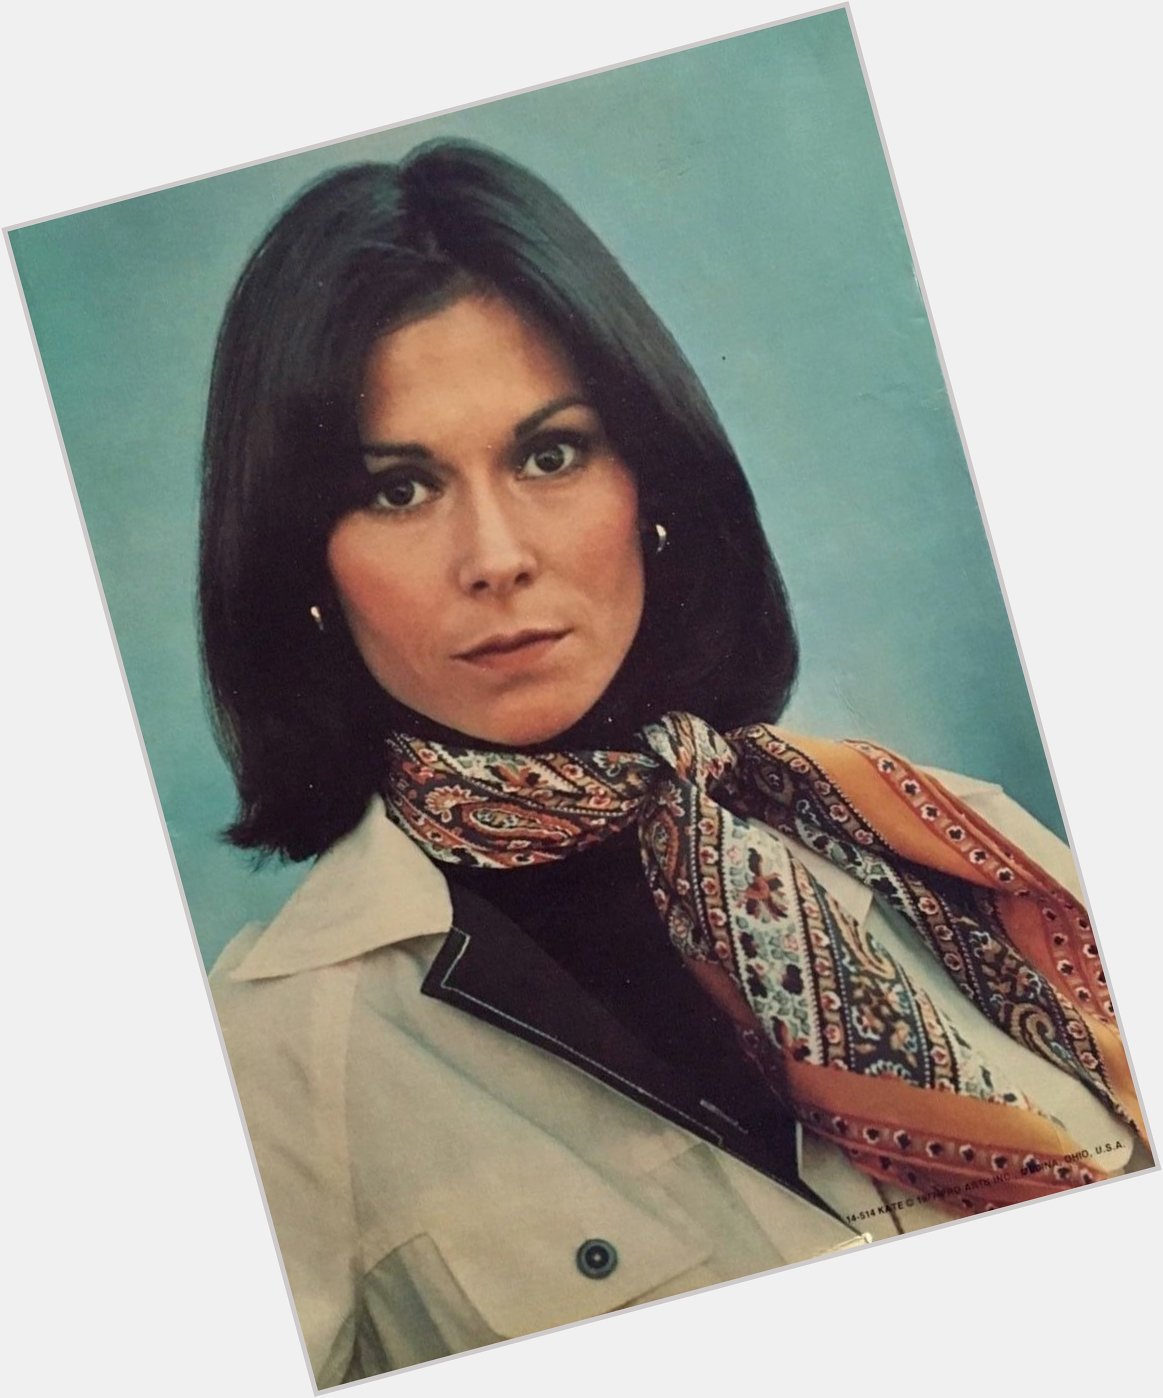 Happy 72nd birthday to Kate Jackson!! 

Did you watch her as Sabrina on Charlie\s Angels? 